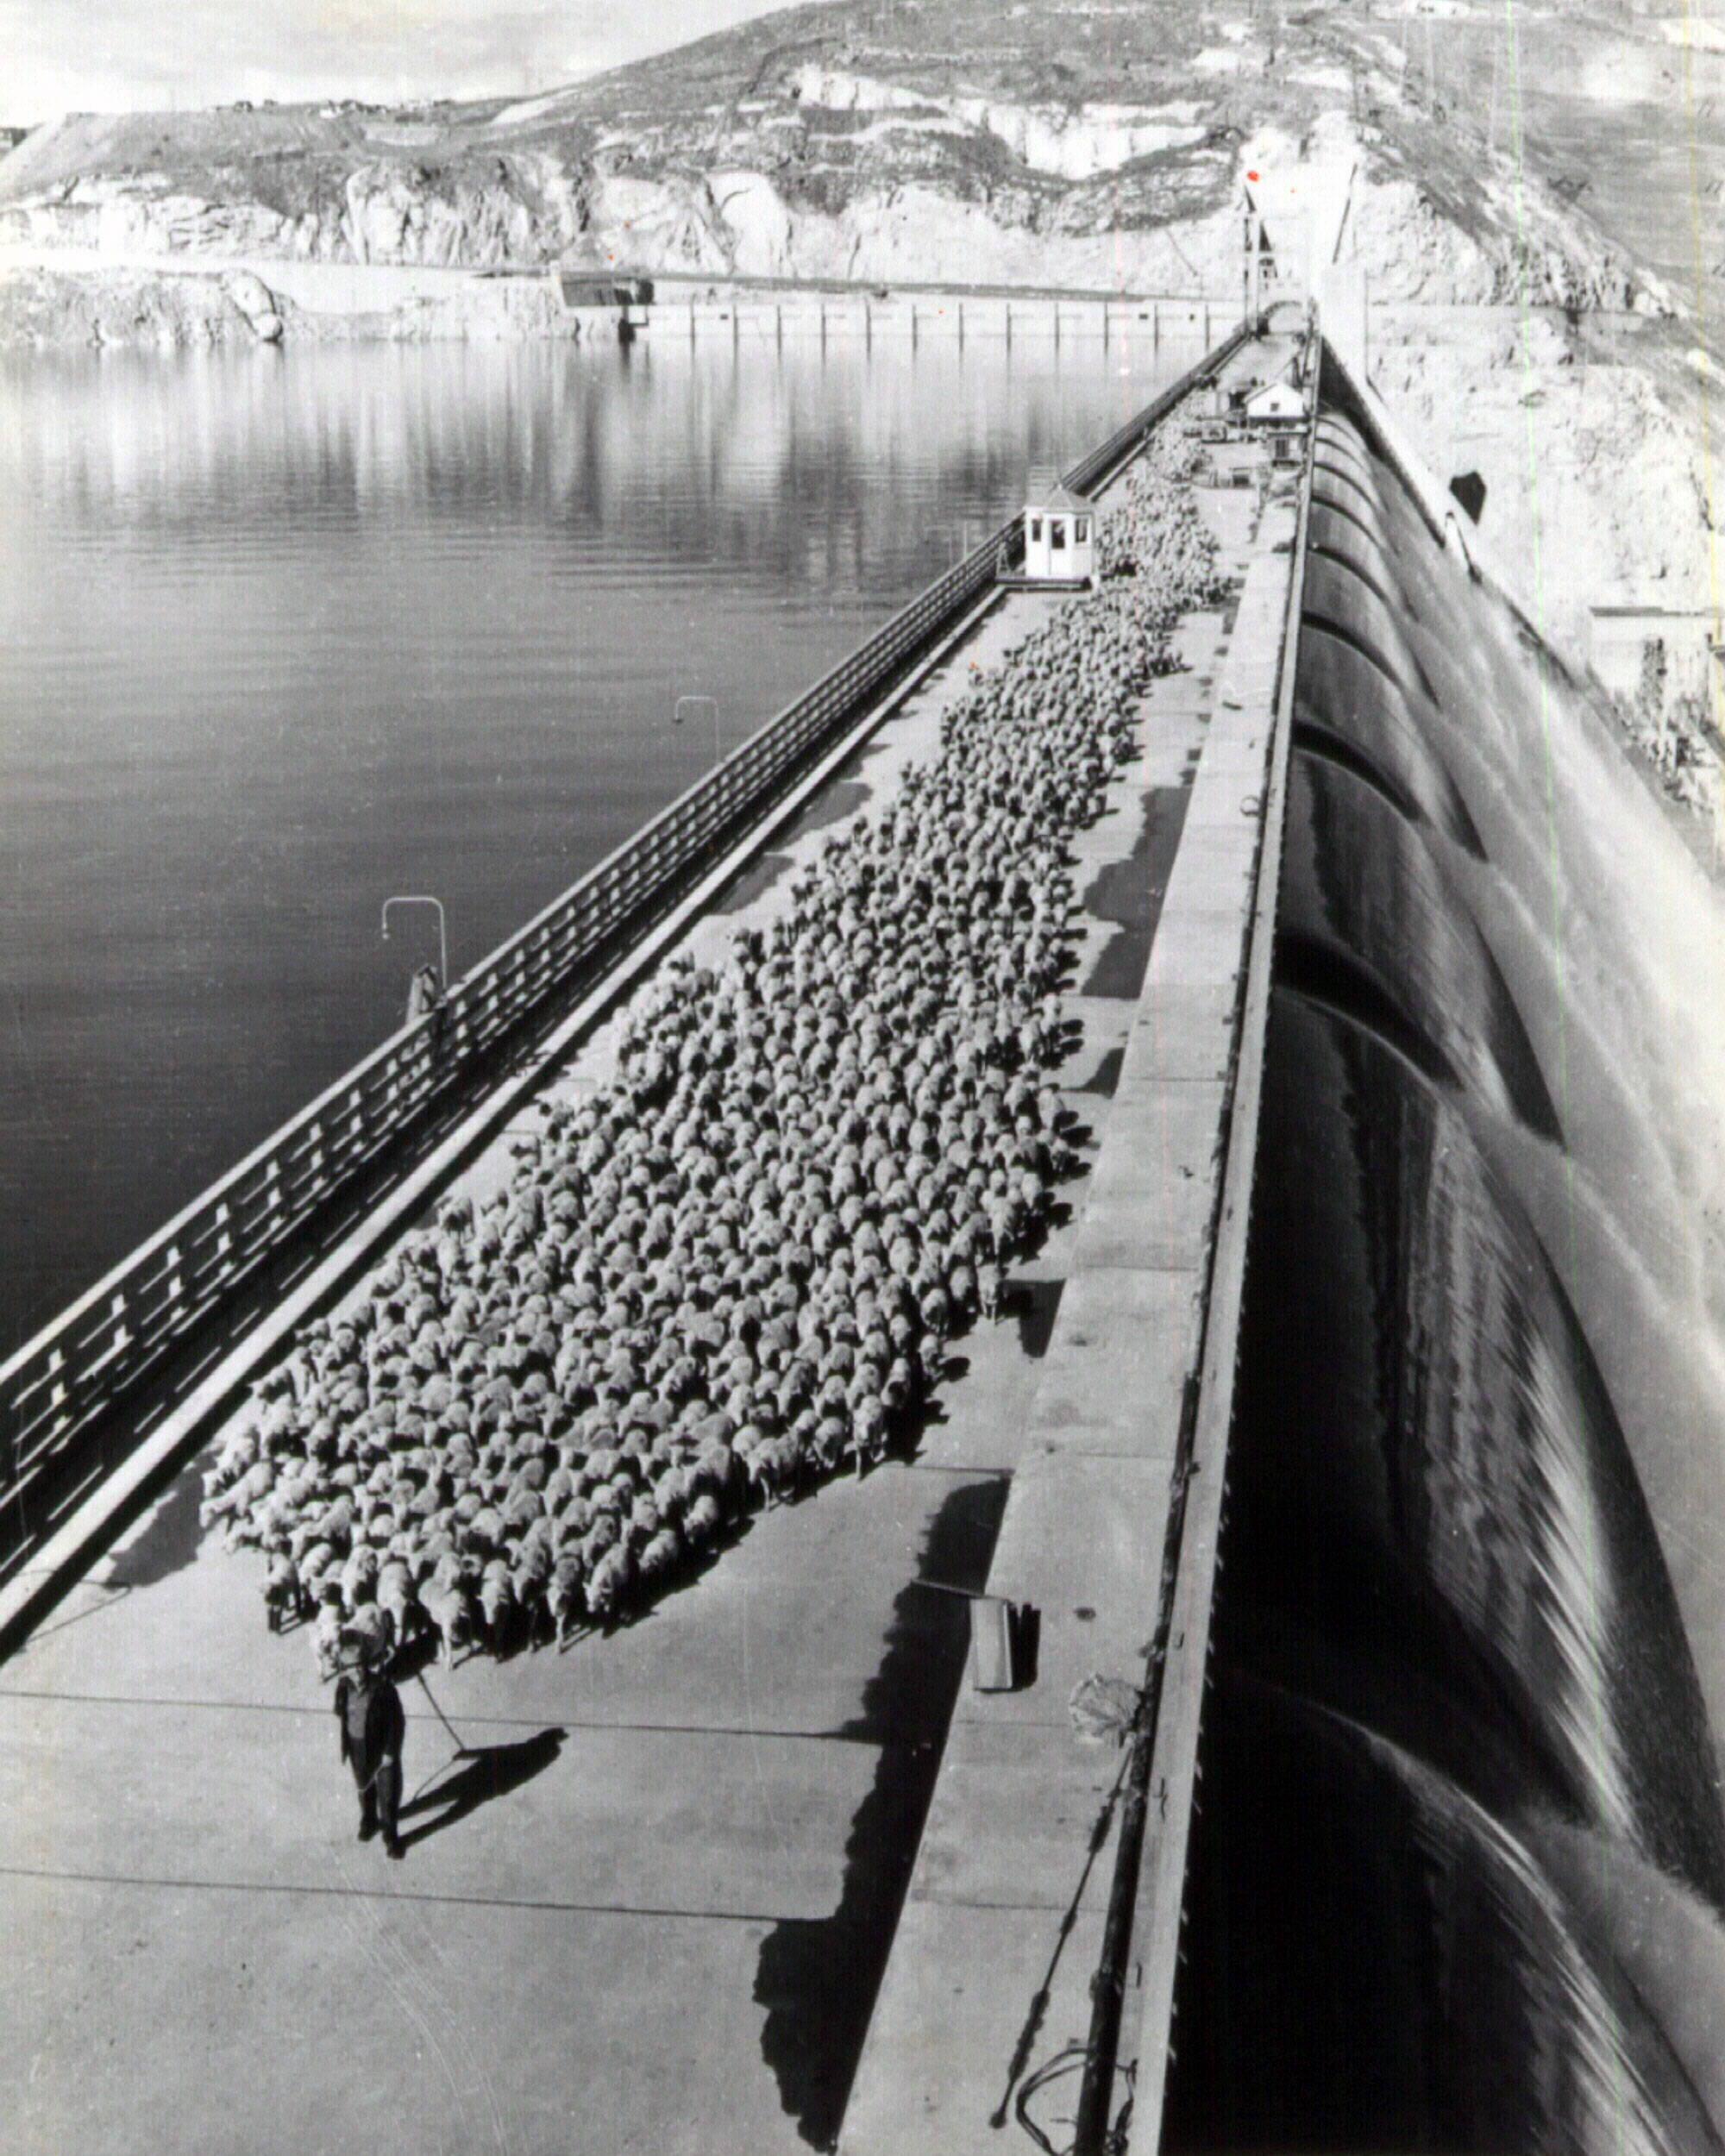 When a local shepherd took his flock across the dam, the image got a great deal of attention locally and nationally. It didn't mark a major milestone, but the image remained popular for many years.